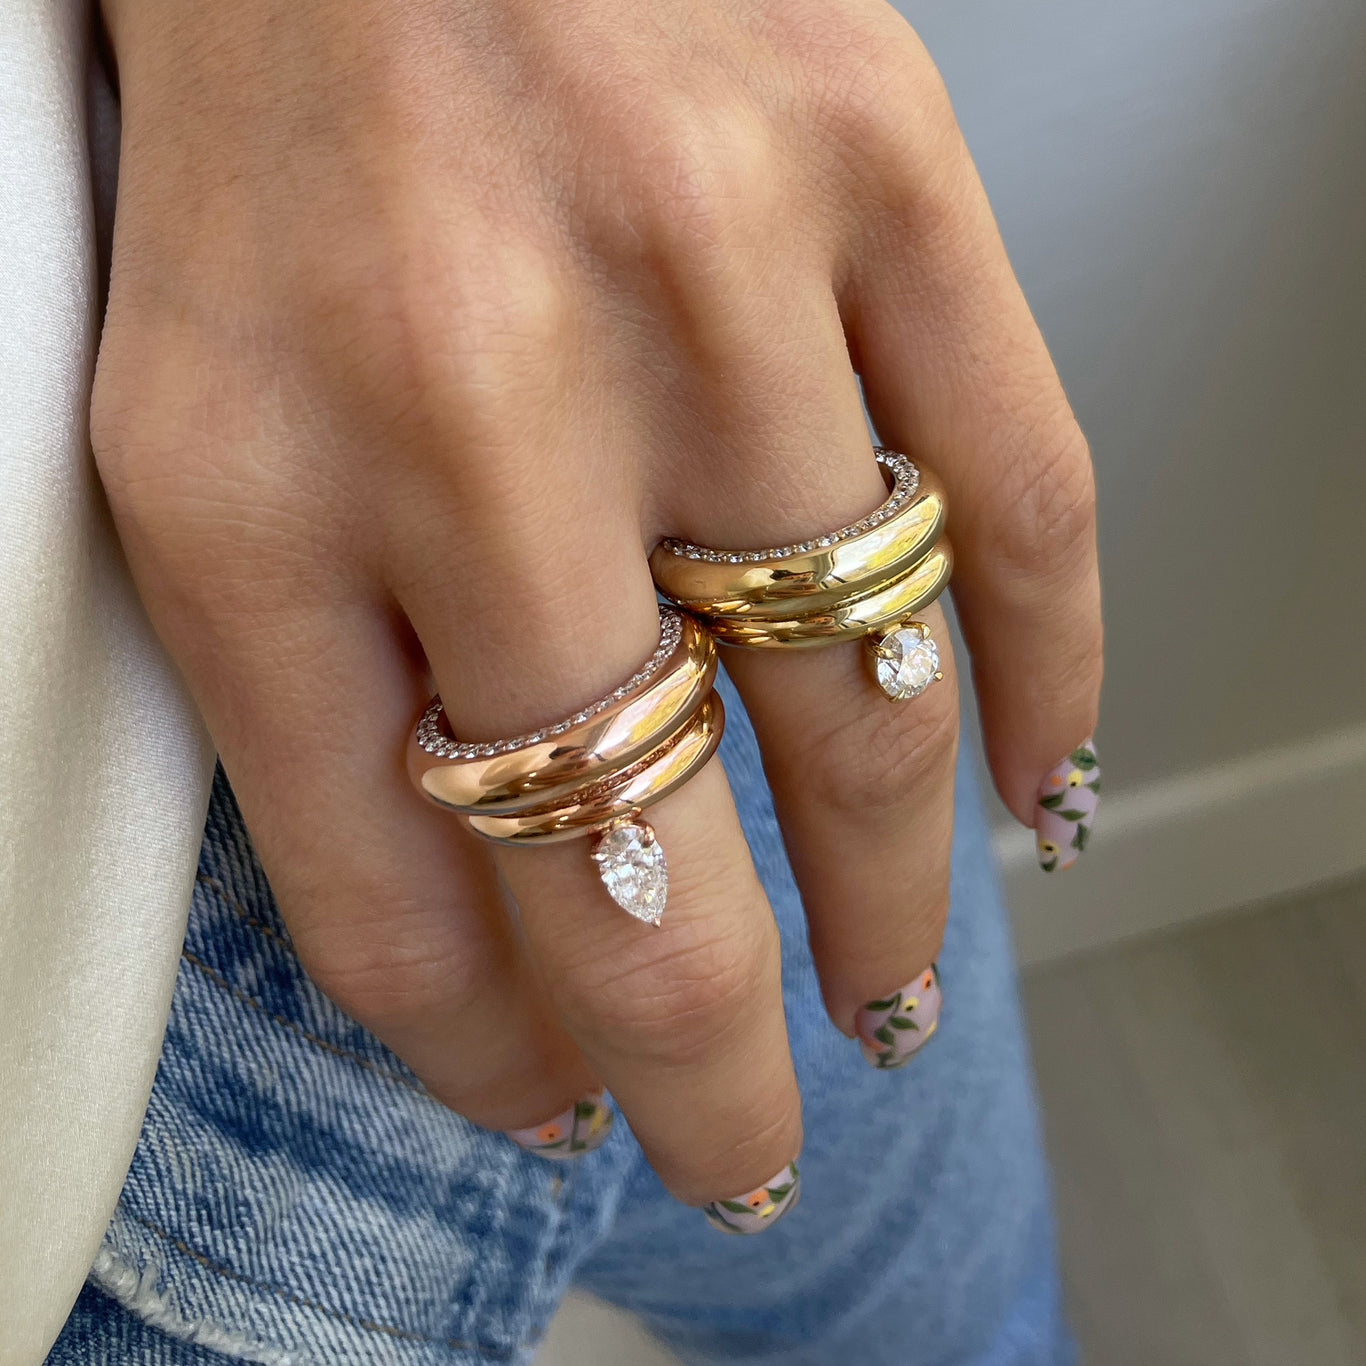 Floating Pear Shape Ring shown layered with the Bombe Ring